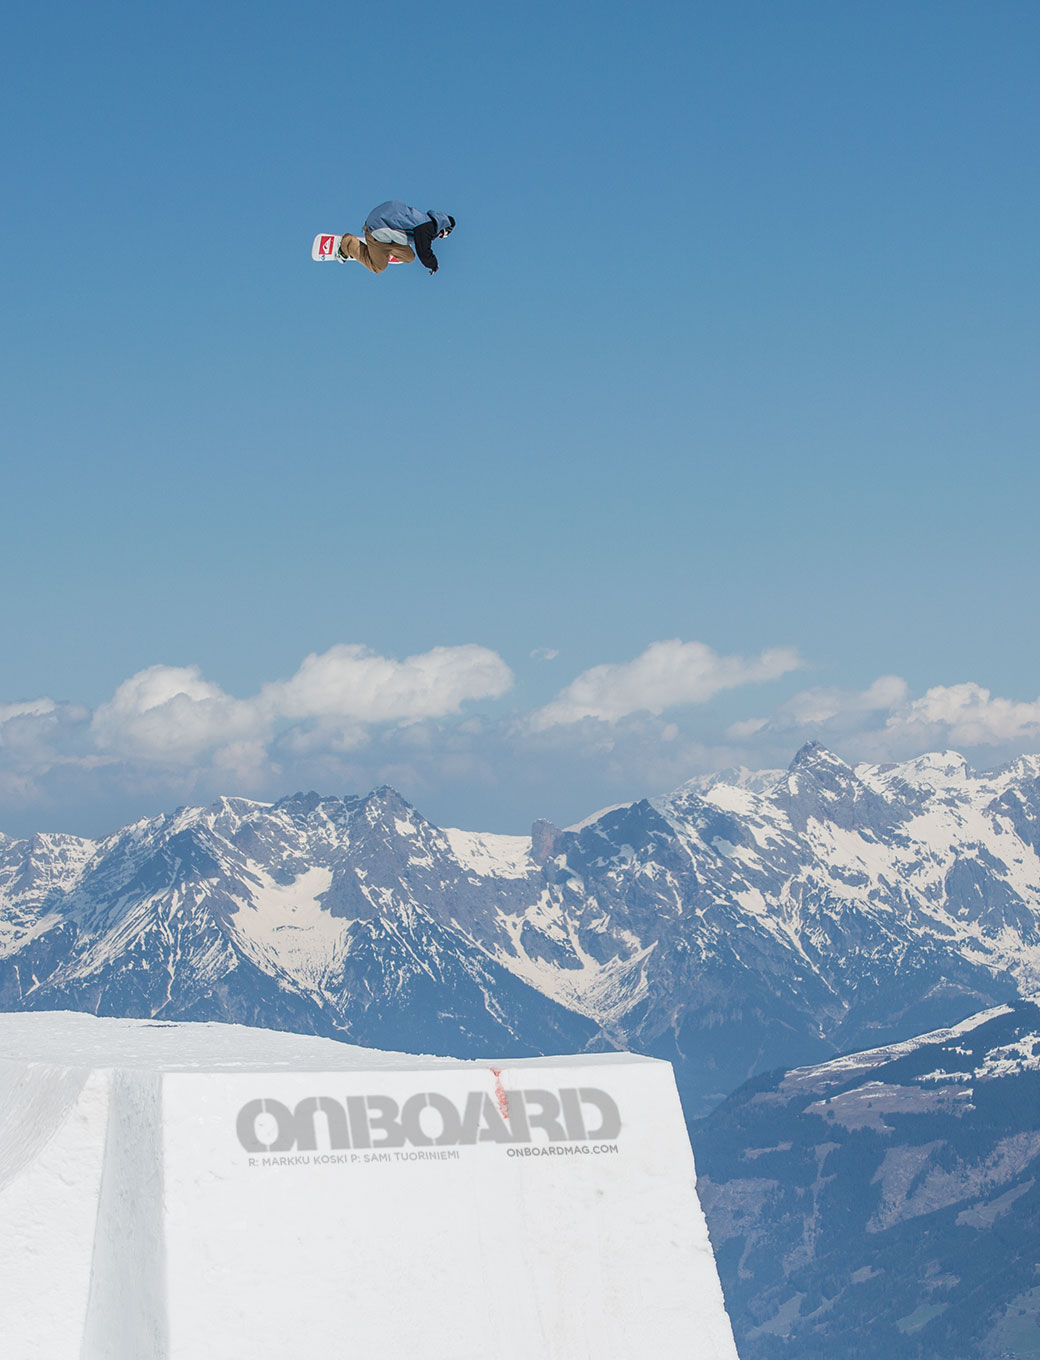 Snowboard Wallpaper For Your iPhone Or Of Onboard